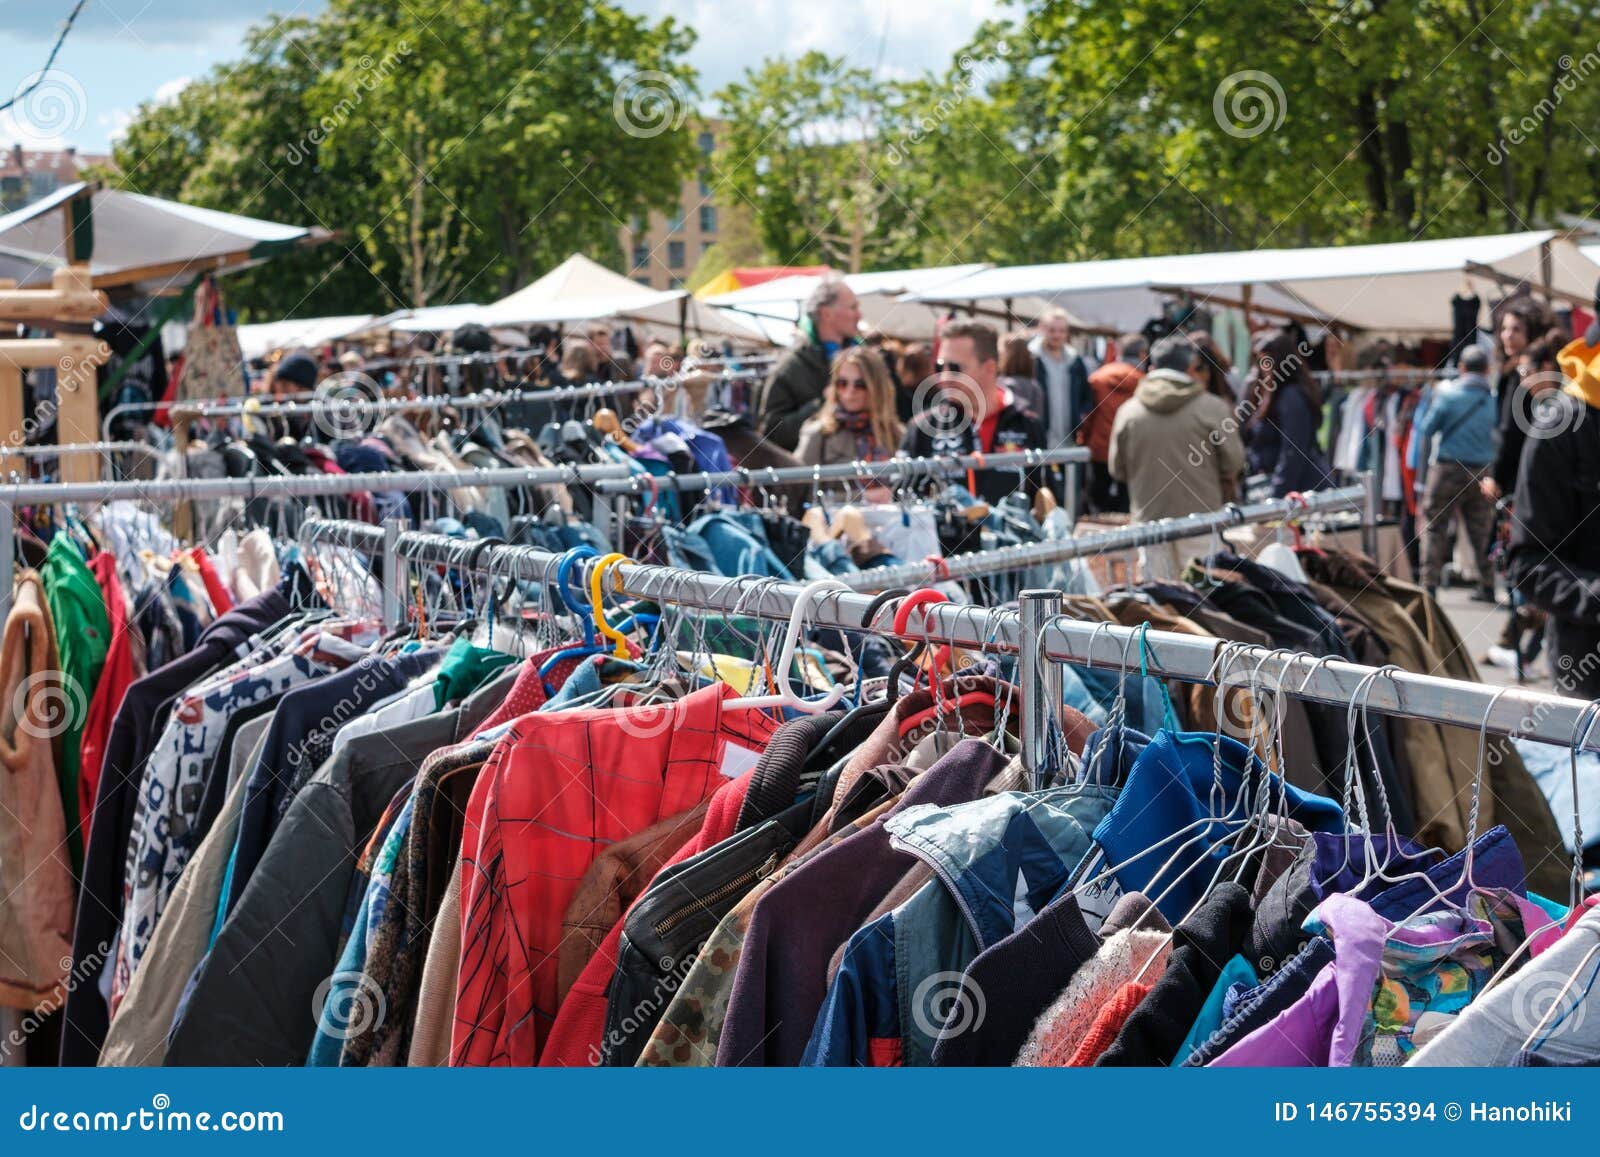 Second Hand Clothing Vintage Fashion On Flea Market Berlin Editorial Stock Image Image Of Clothing Berlin